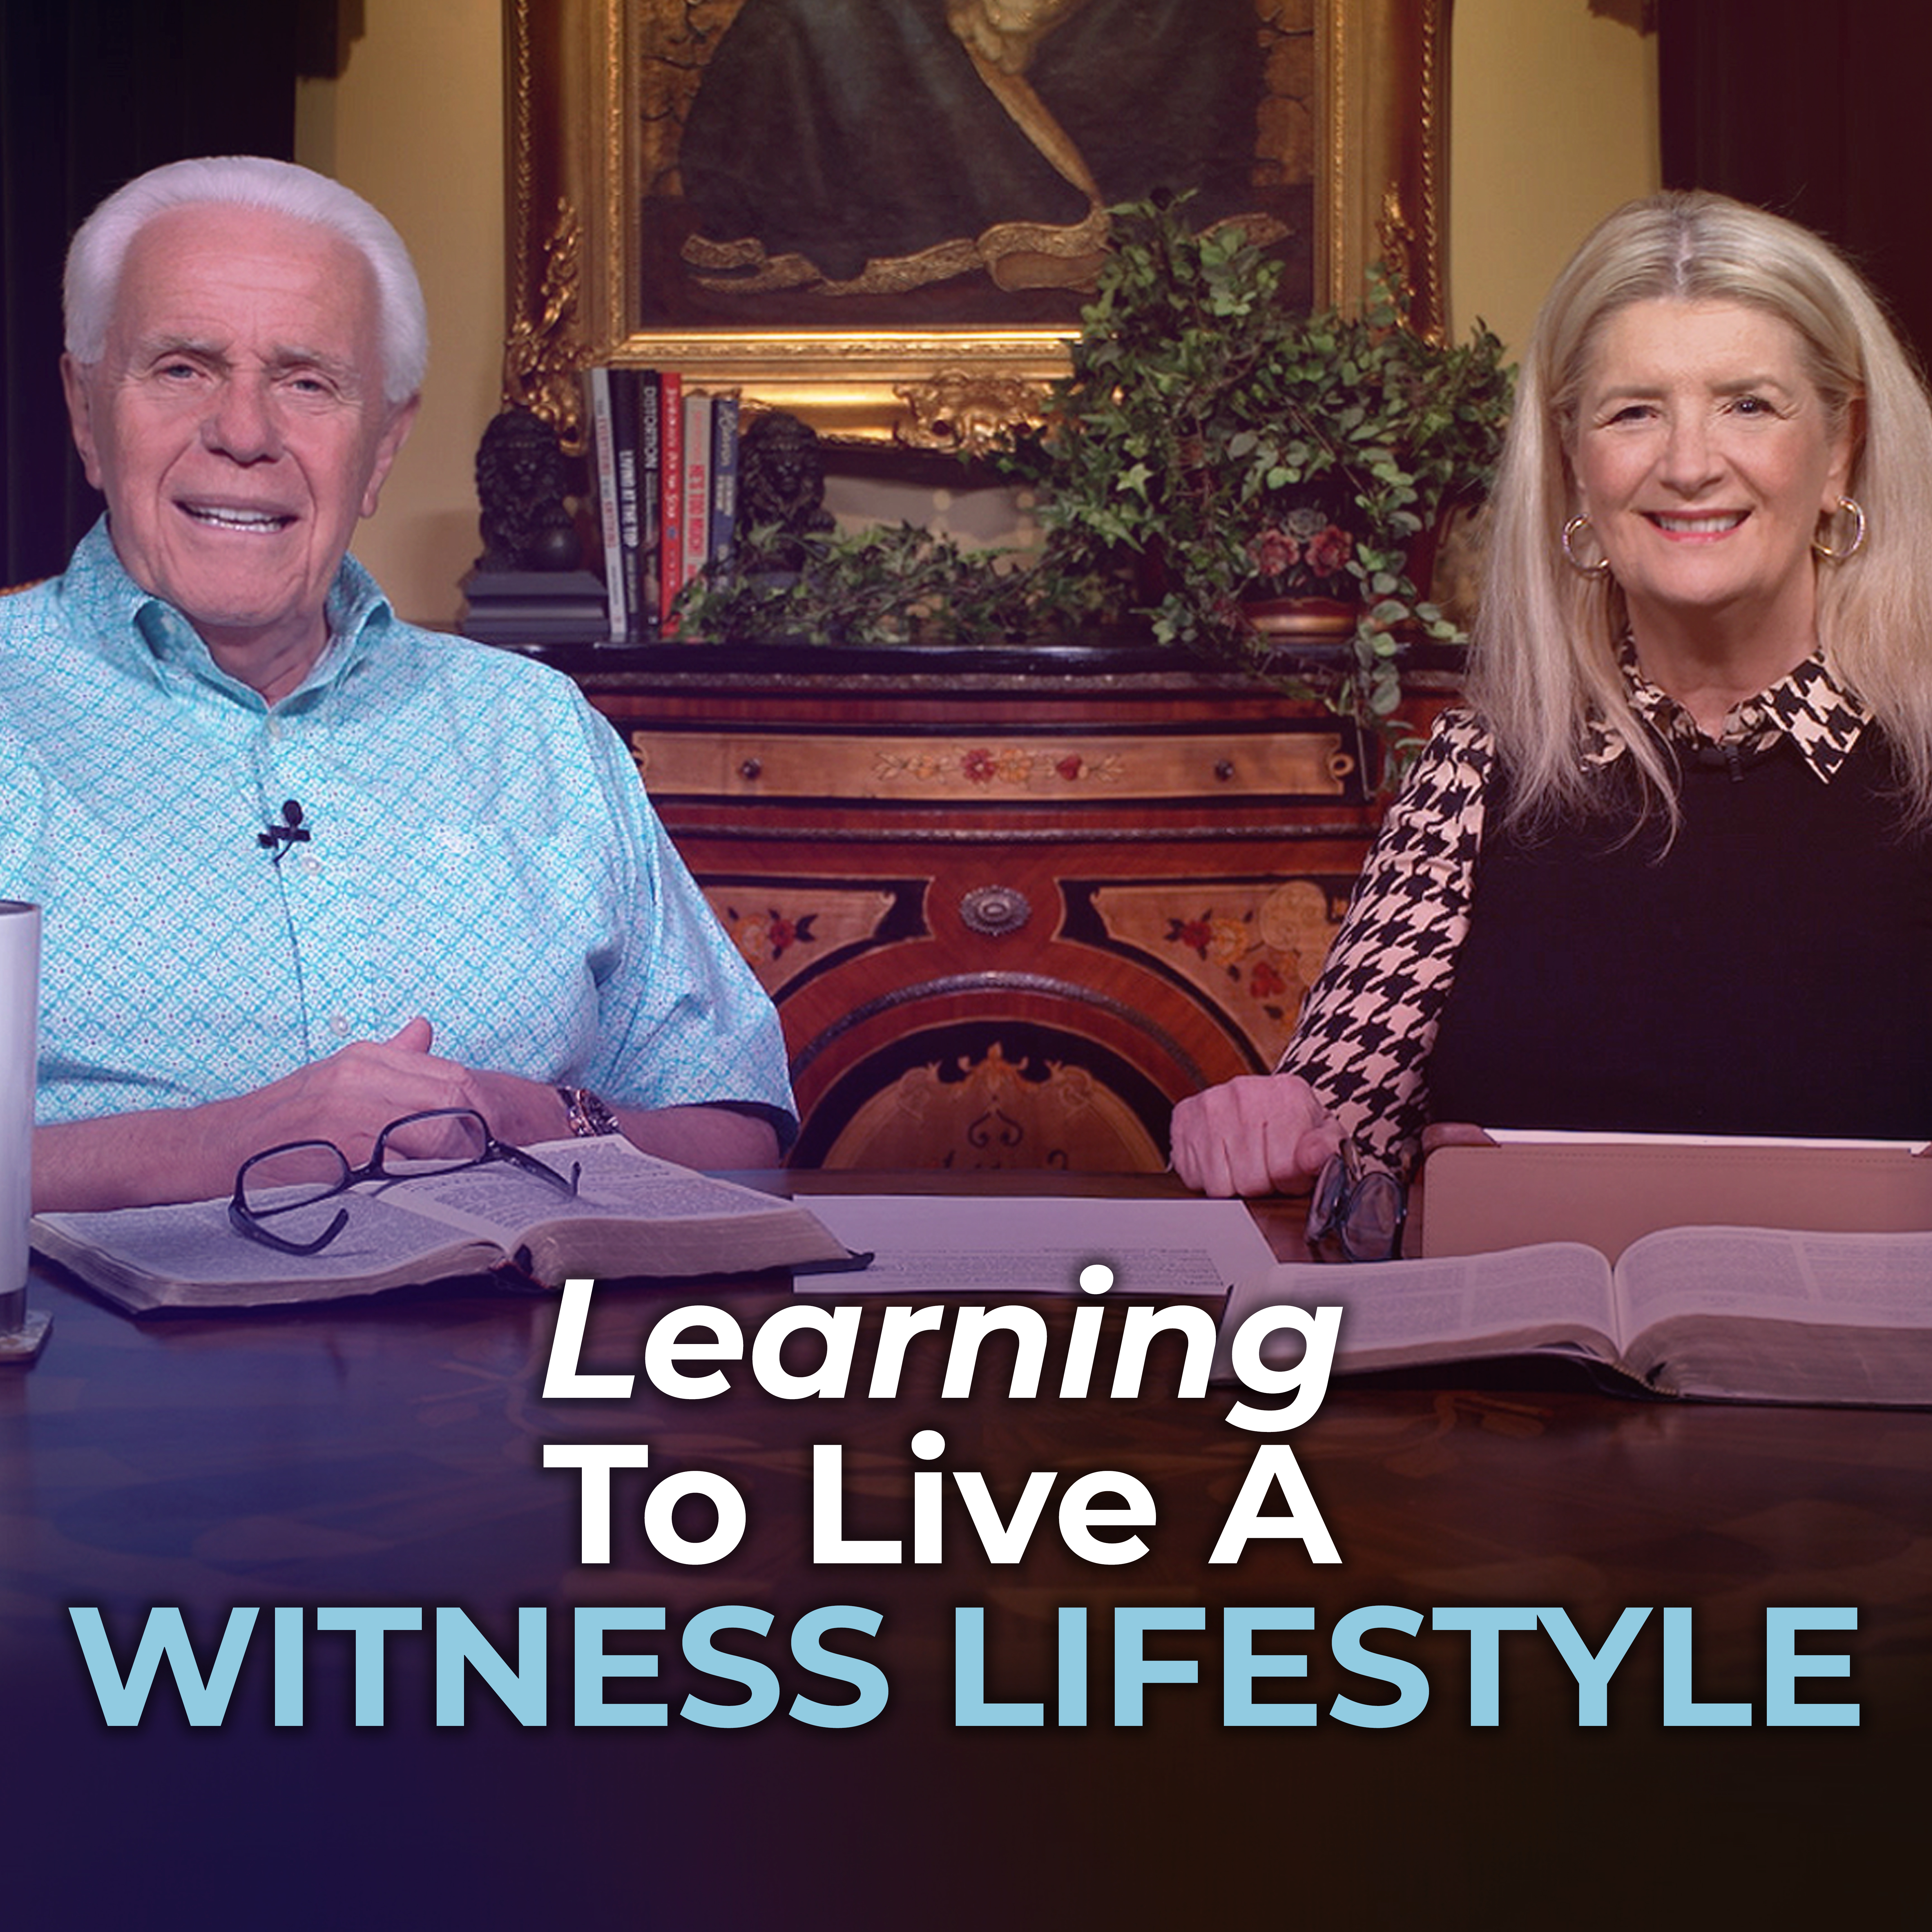 Learning To Live A Witness Lifestyle